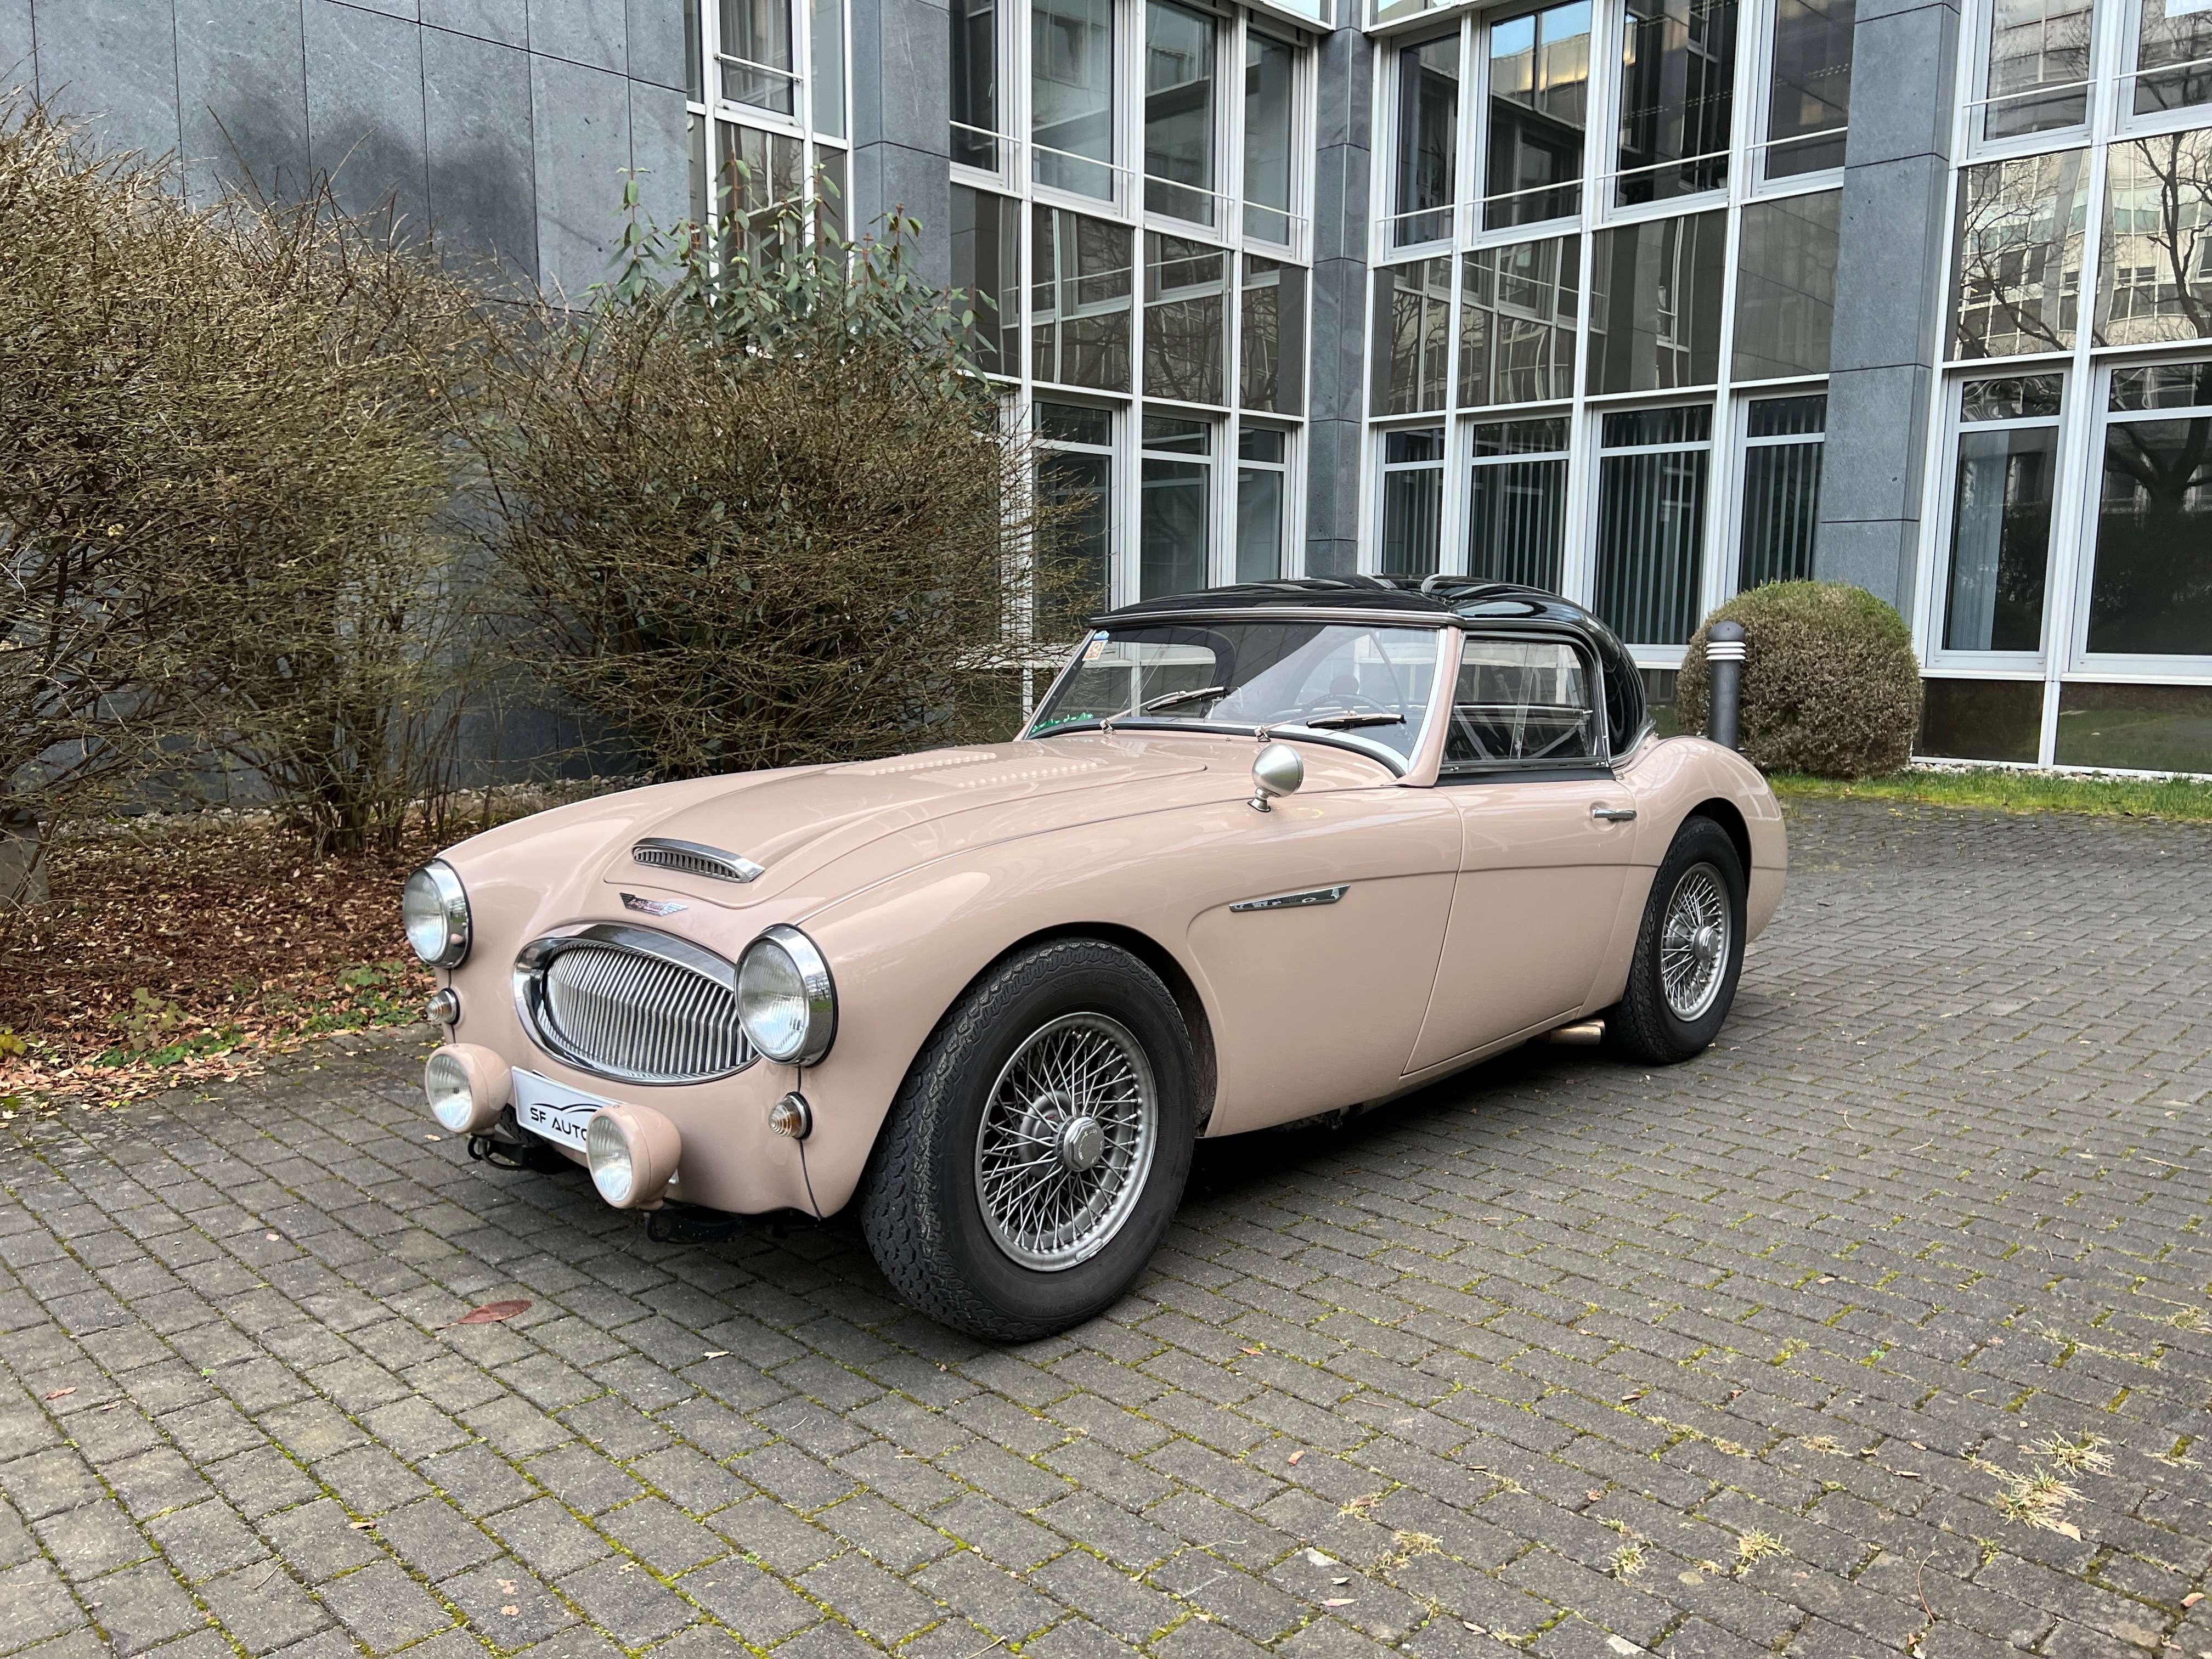 Austin-Healey 3000 Convertible in Beige used in München for € 99,900.-